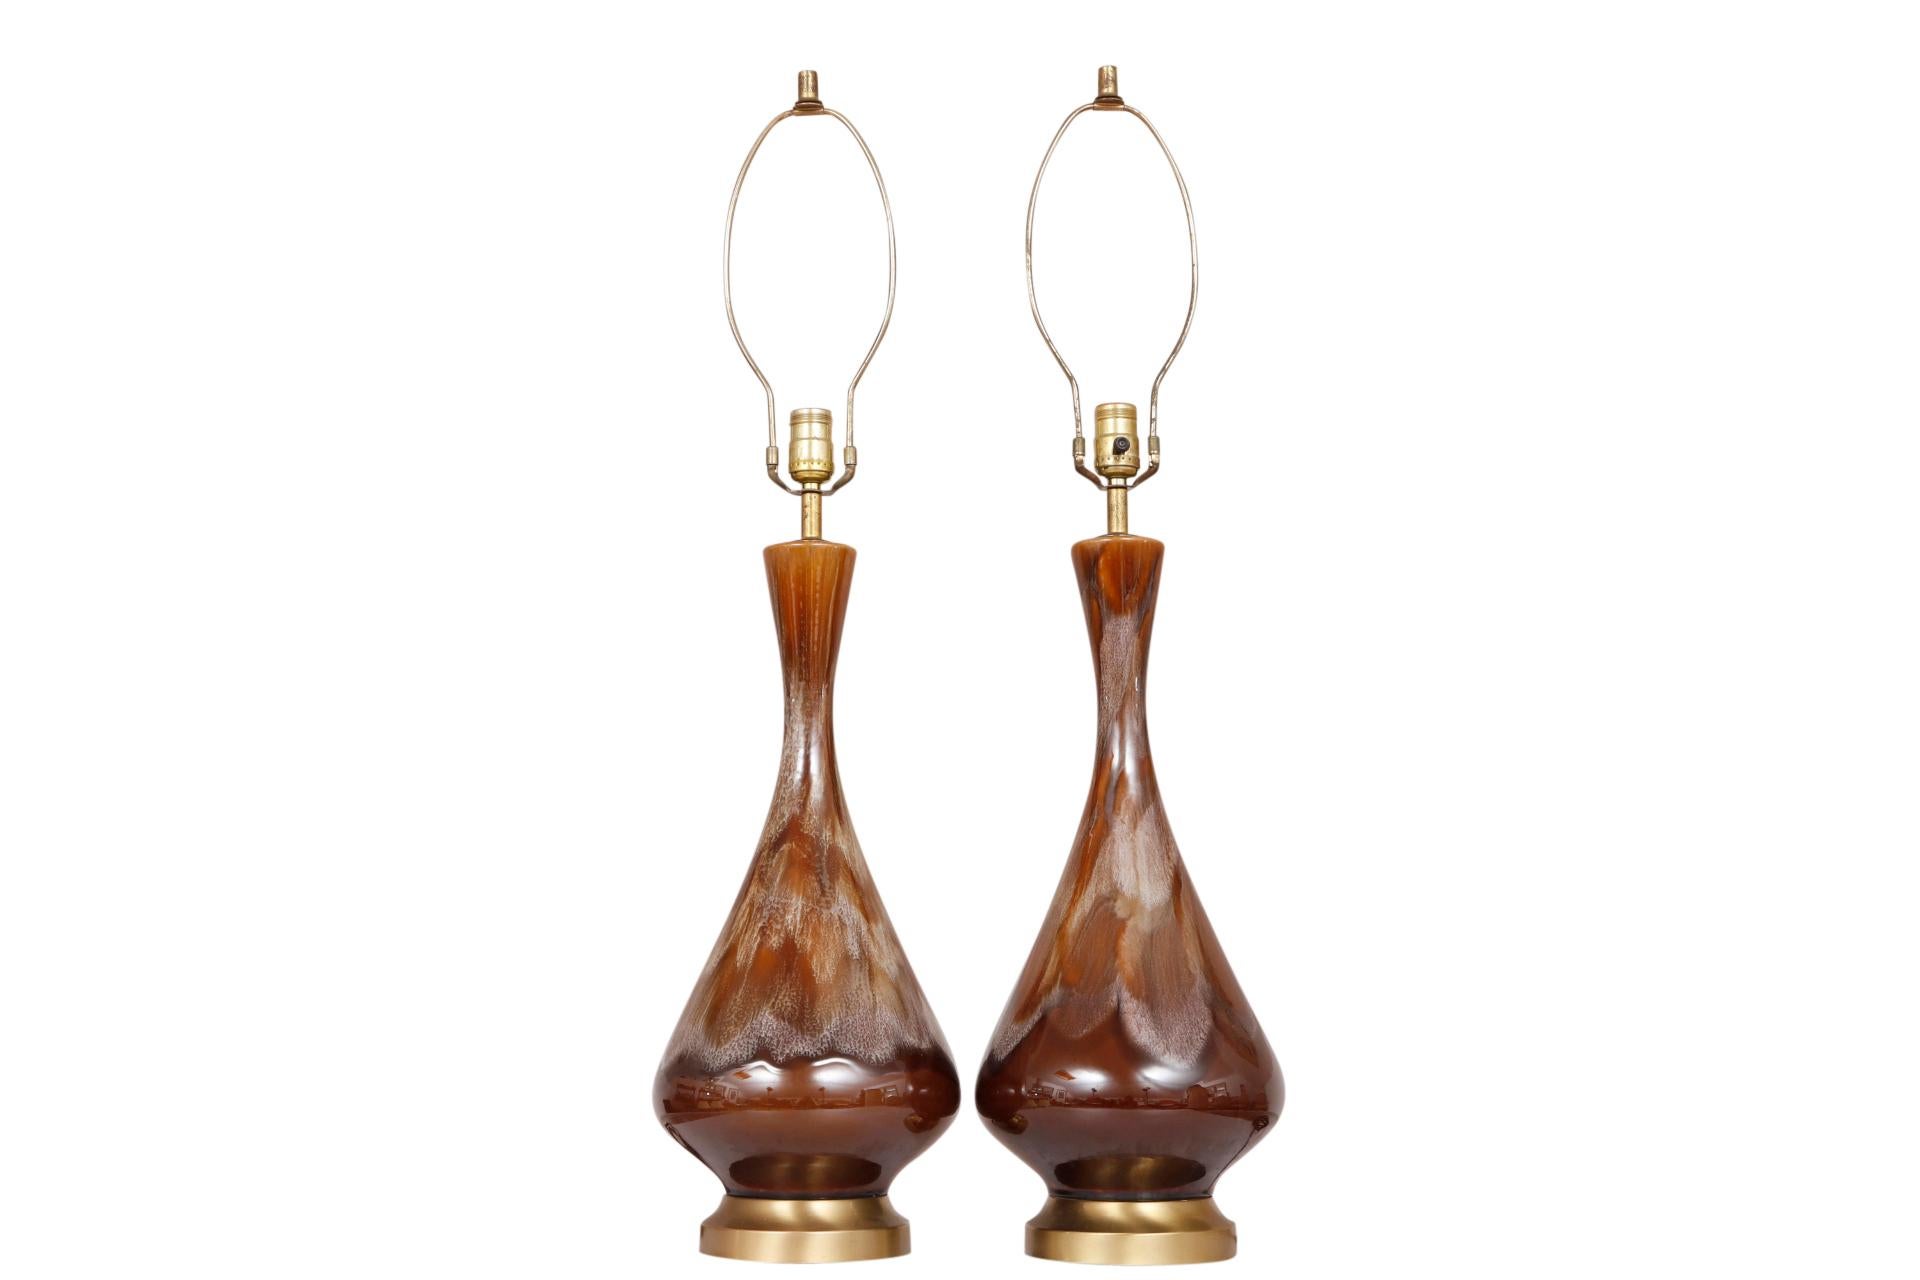 Brown Drip Glaze Ceramic Table Lamps, a Pair In Good Condition For Sale In Bradenton, FL